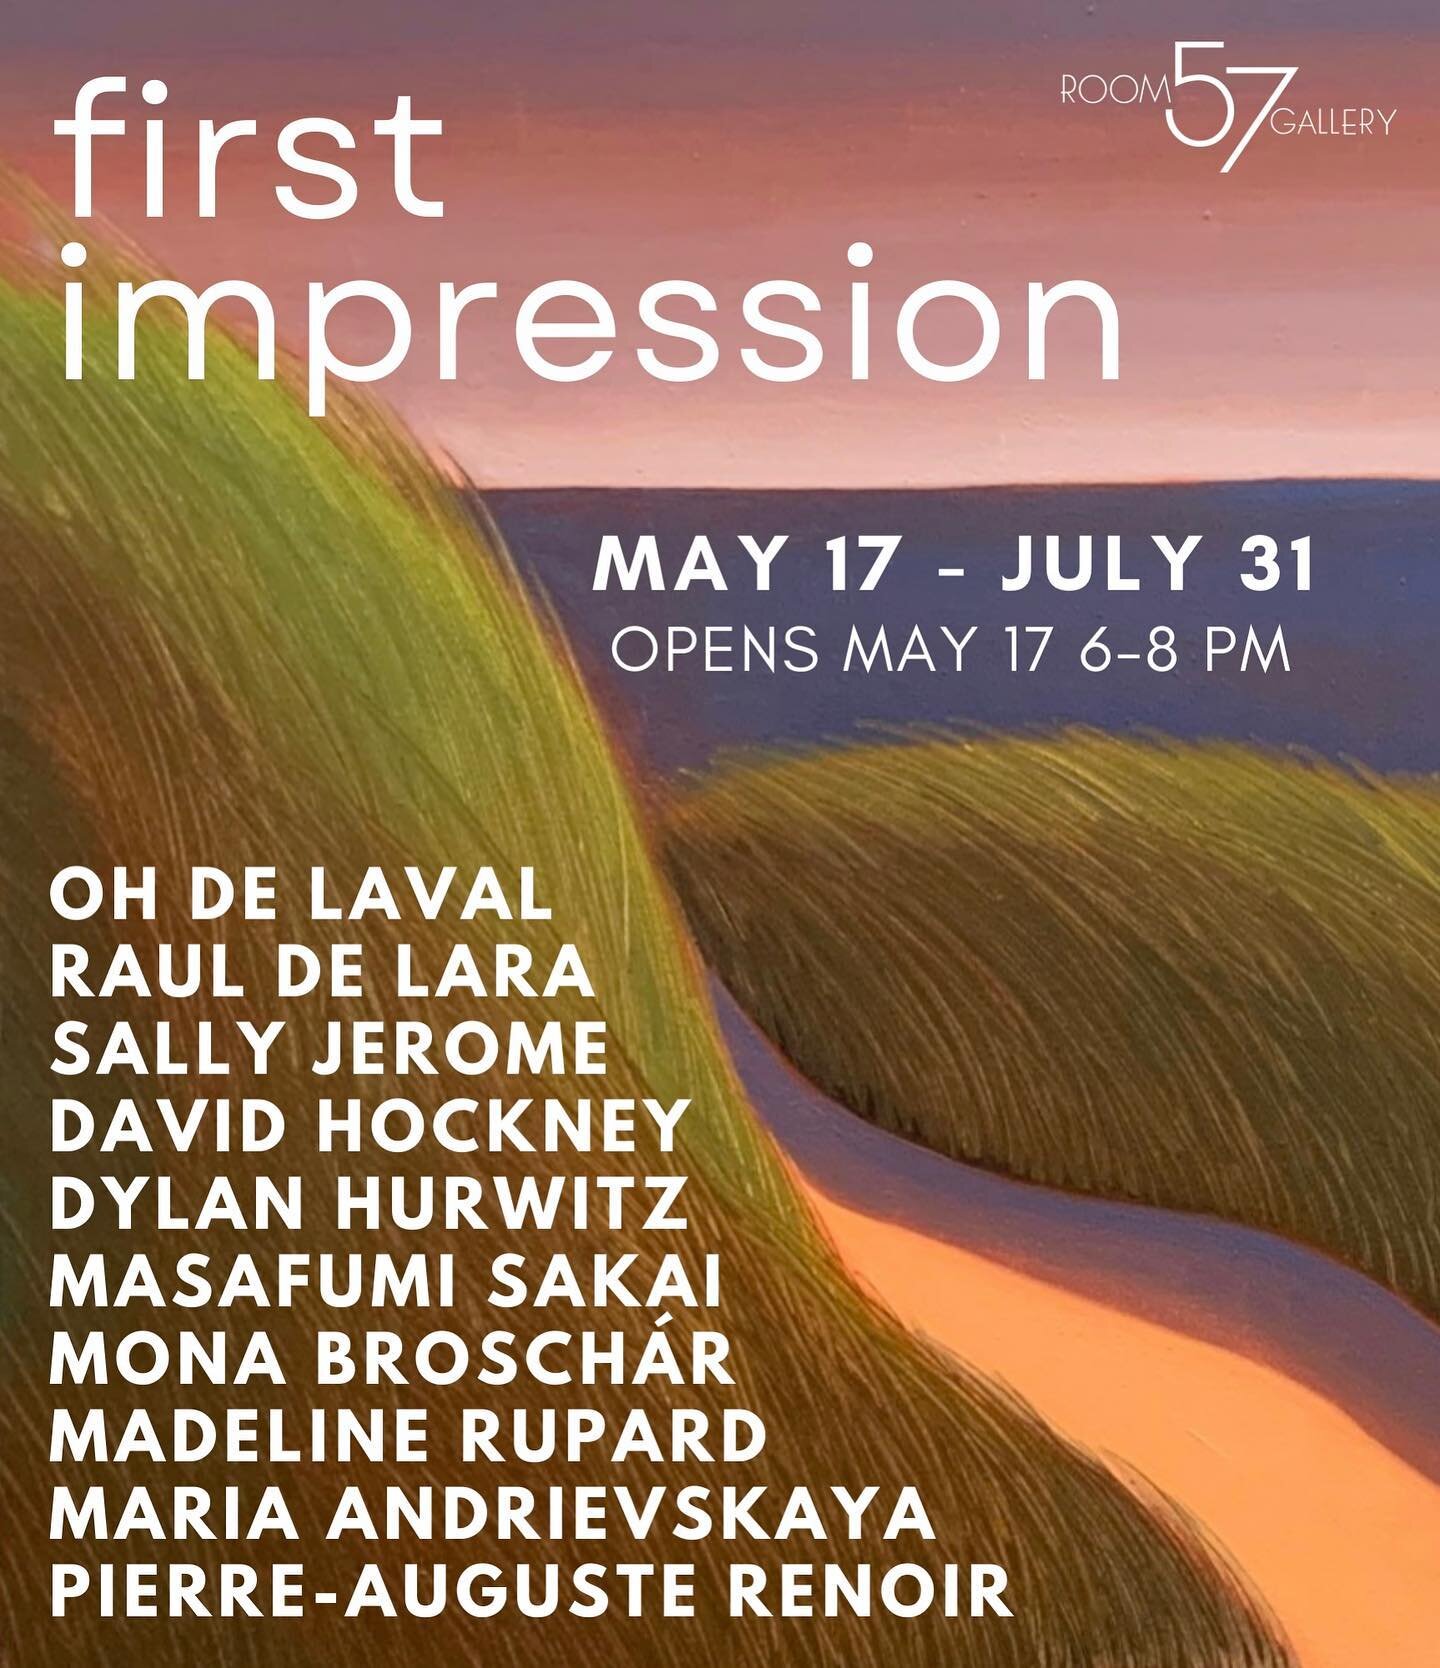 Opening TONIGHT at Room 57! Join us and the artists from 6 - 8 pm. We can't wait to share this robust show of paintings and sculptures--In 'First Impression' contemporary artists give a modern spin on a classical theme. Featuring the work of artists 